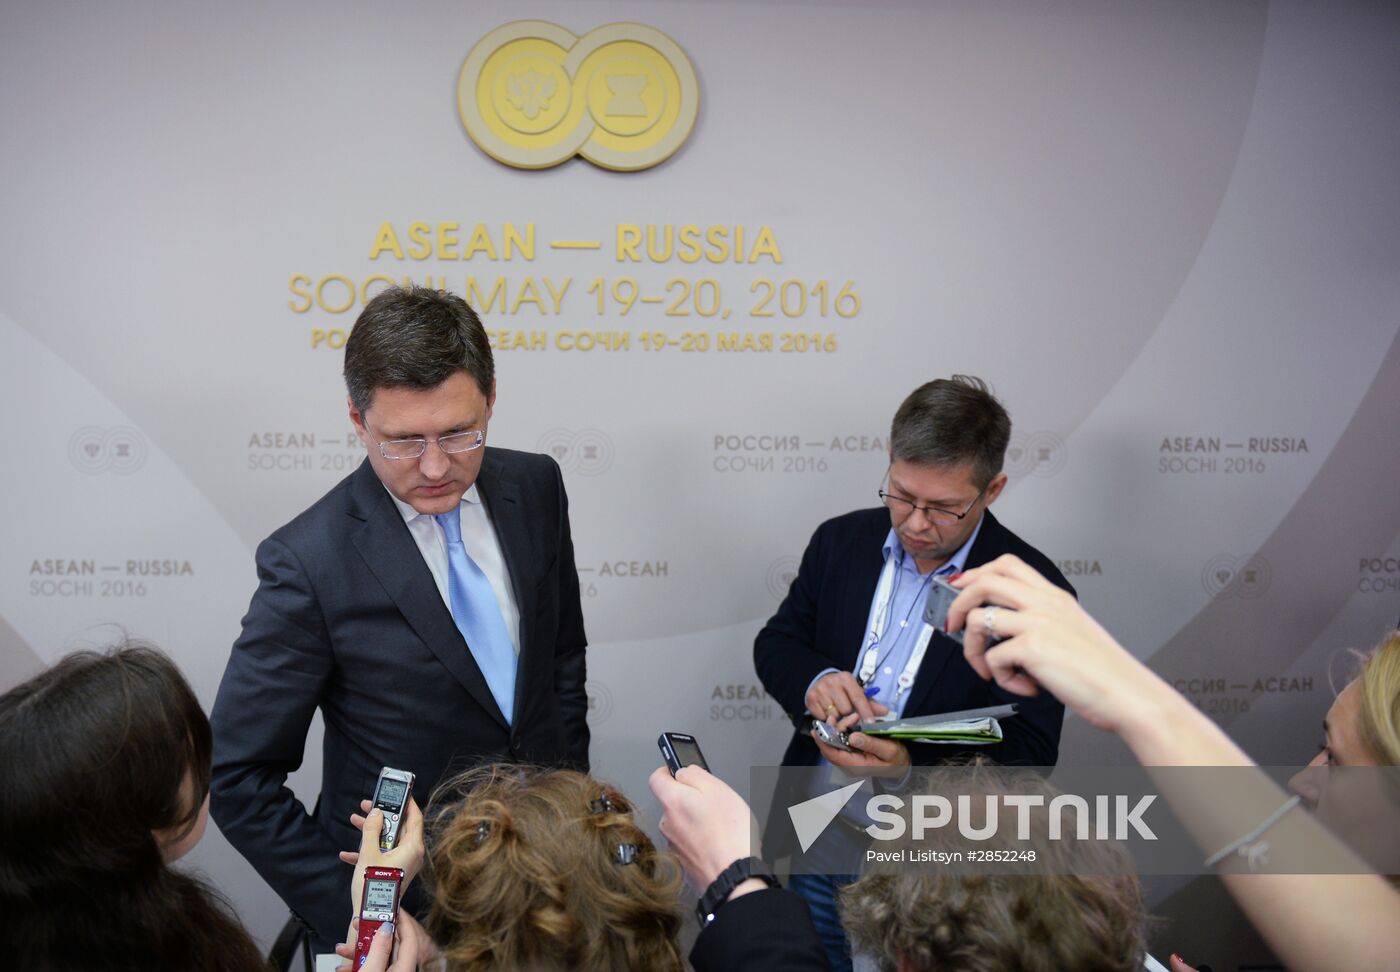 Press briefing with Russian Minister of Energy Alexander Novak, ASEAN-Russia: Energy Dialogue and Energy Cooperation Prospects